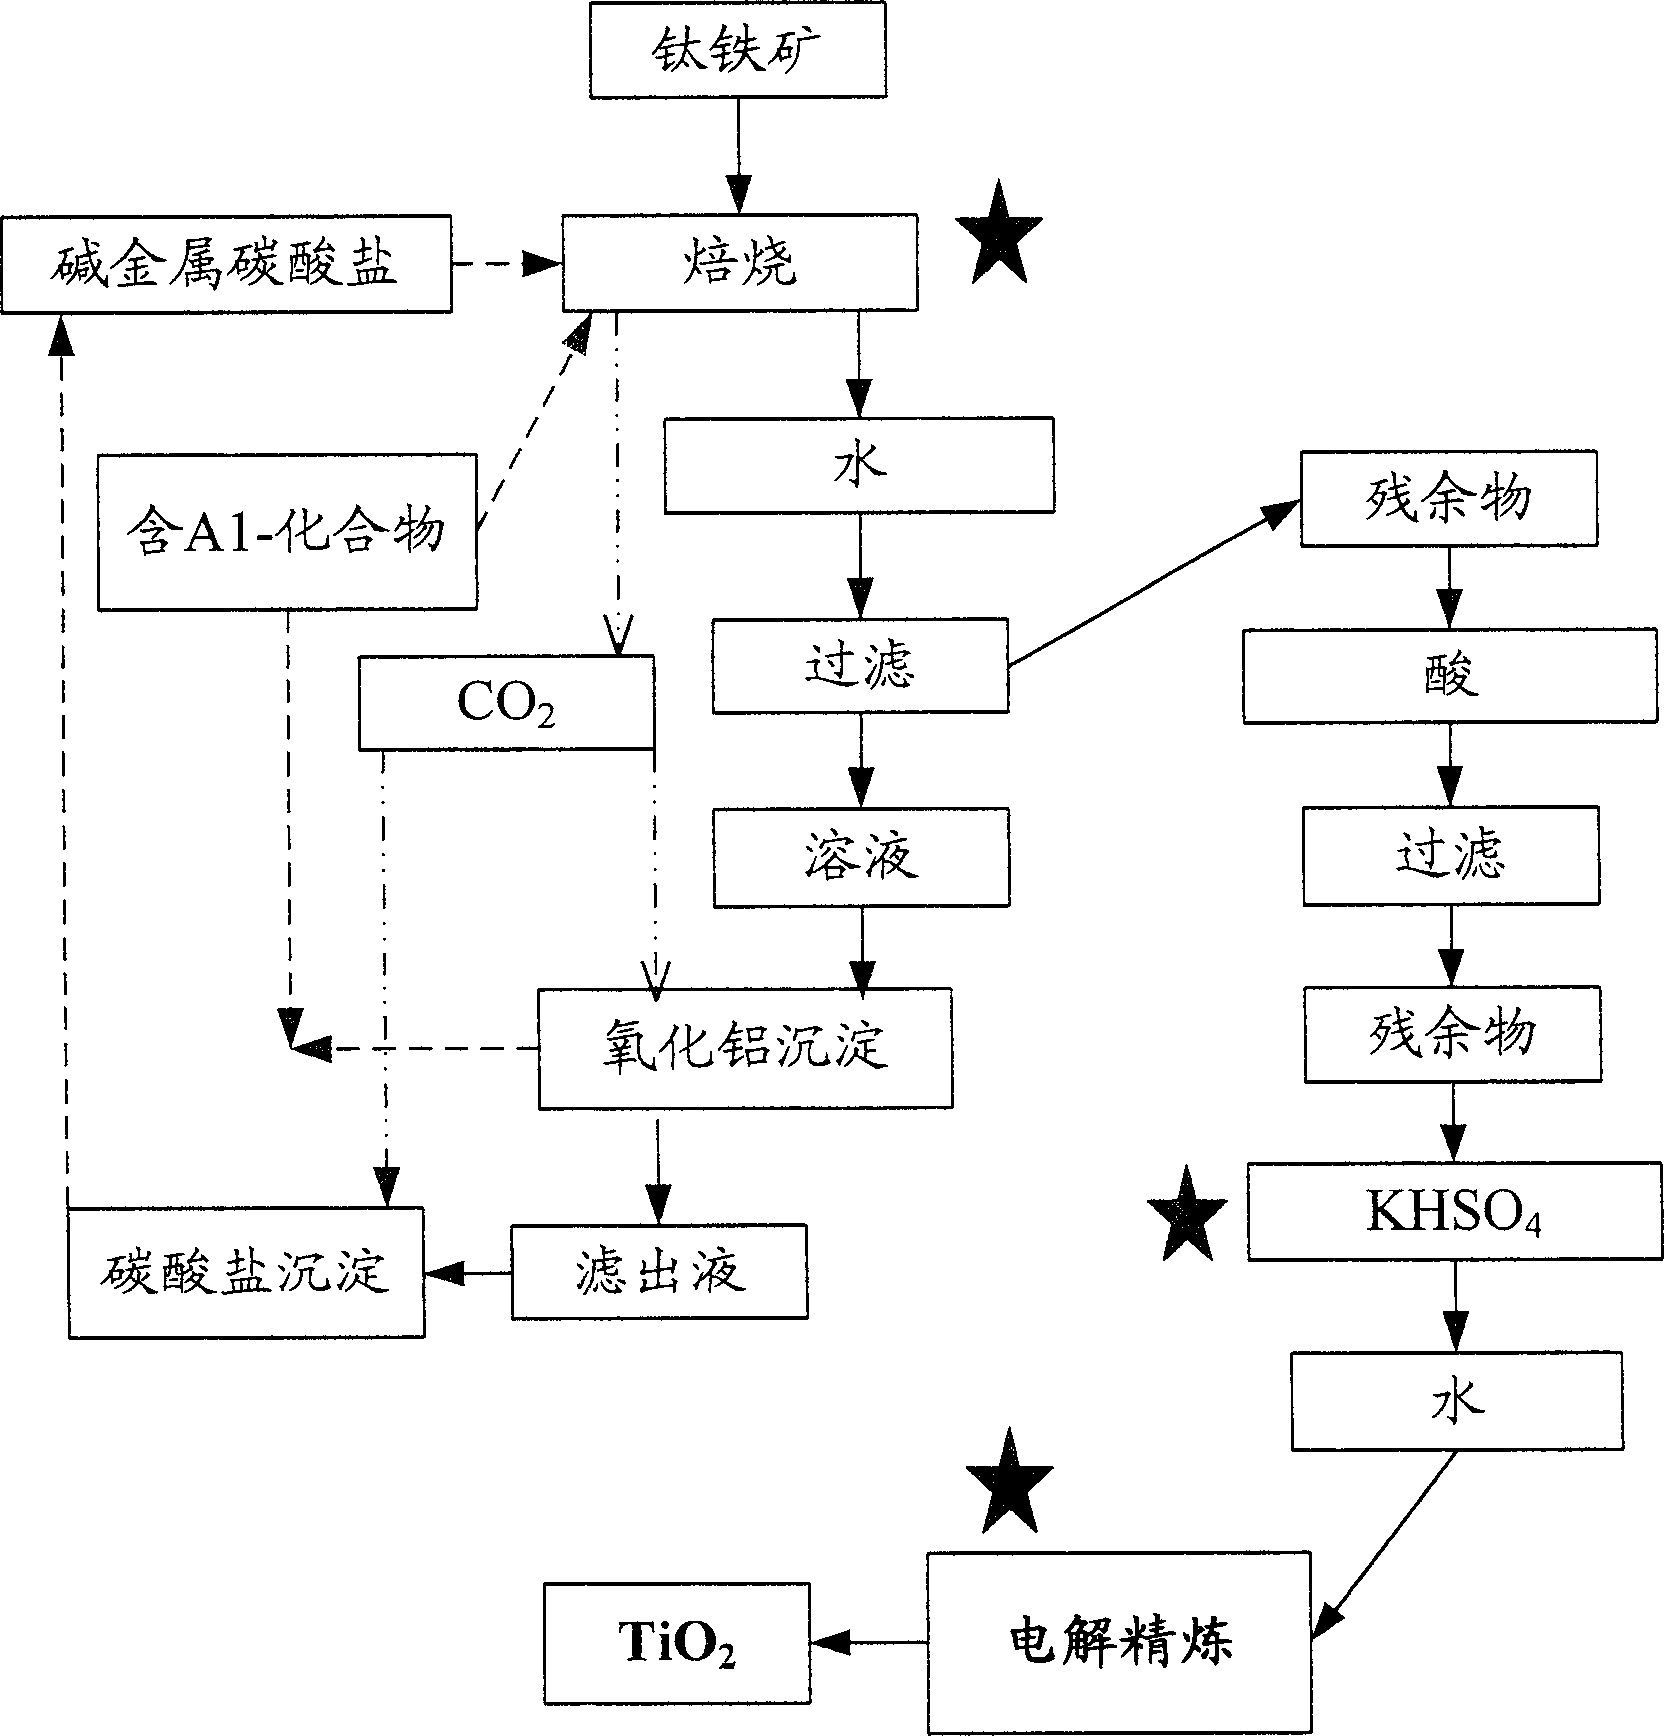 Extraction process for reactive metal oxides